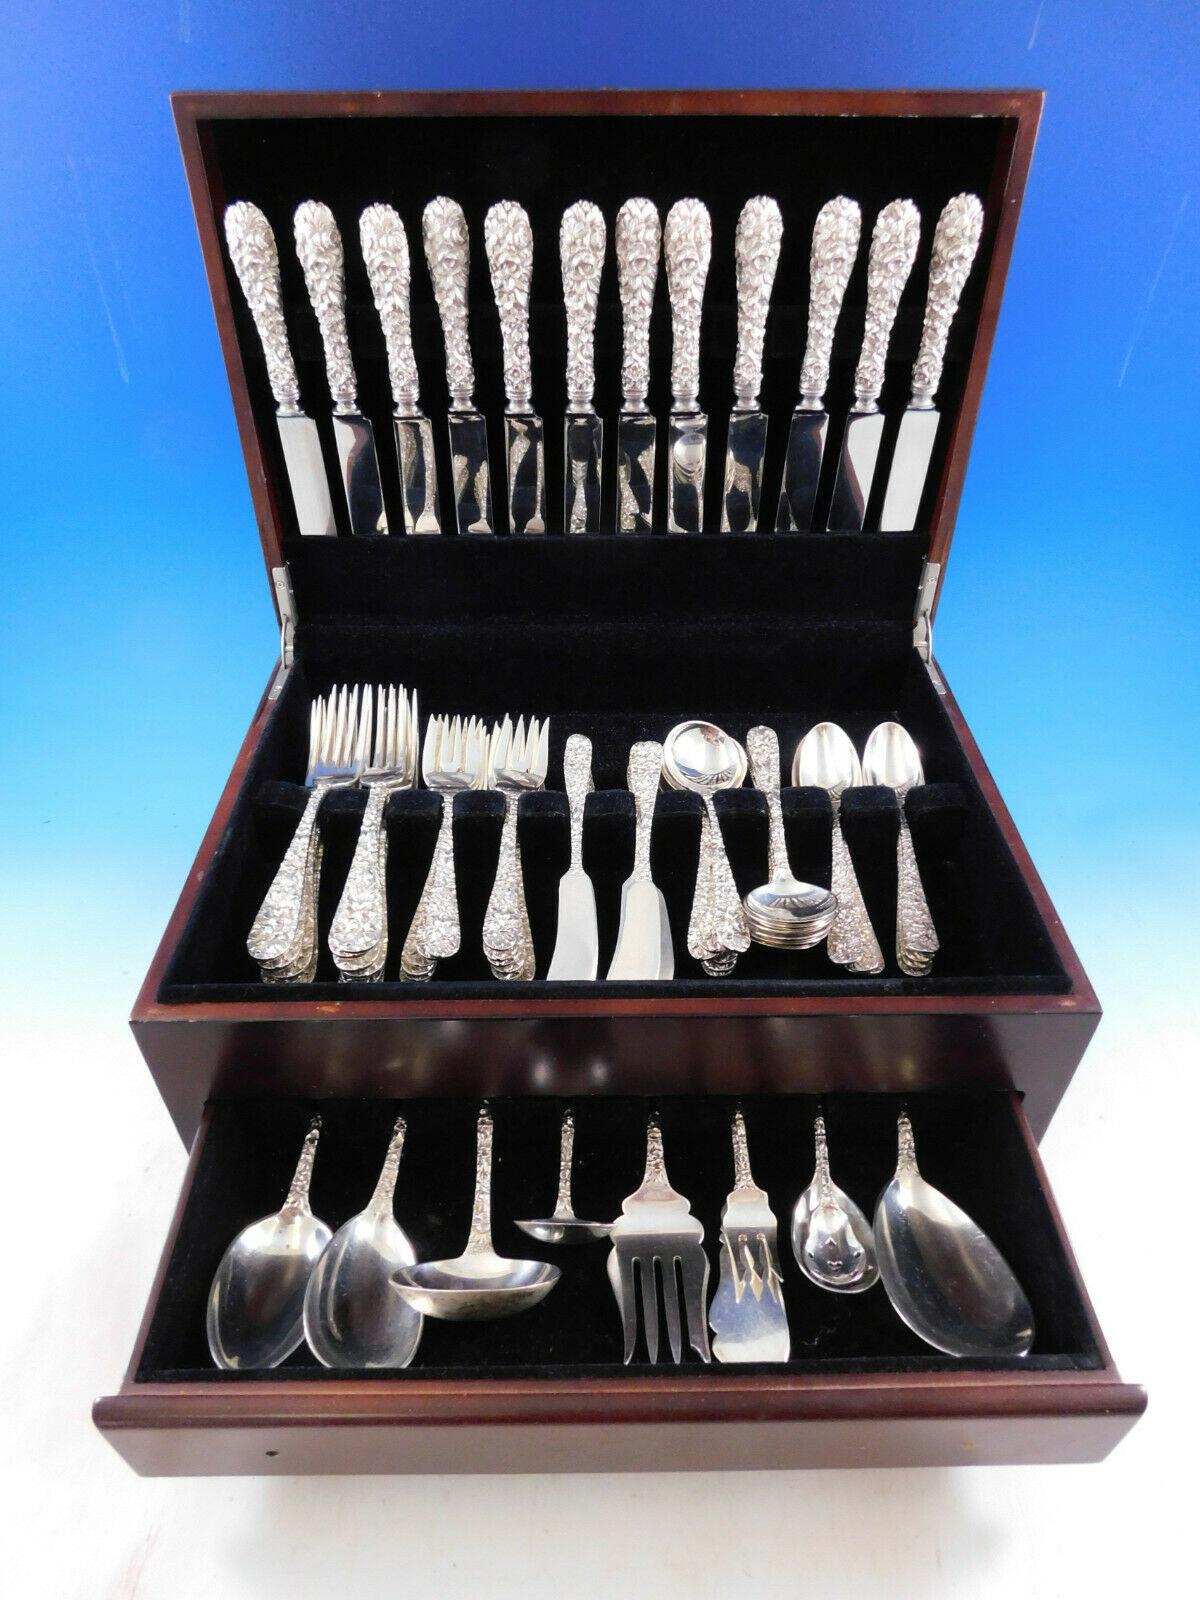 Rare Princess by Stieff hand chased high-relief repousse sterling silver flatware set, 70 pieces (plus 12 Rose by Stieff Teaspoons). This set includes:

12 knives, 8 5/8